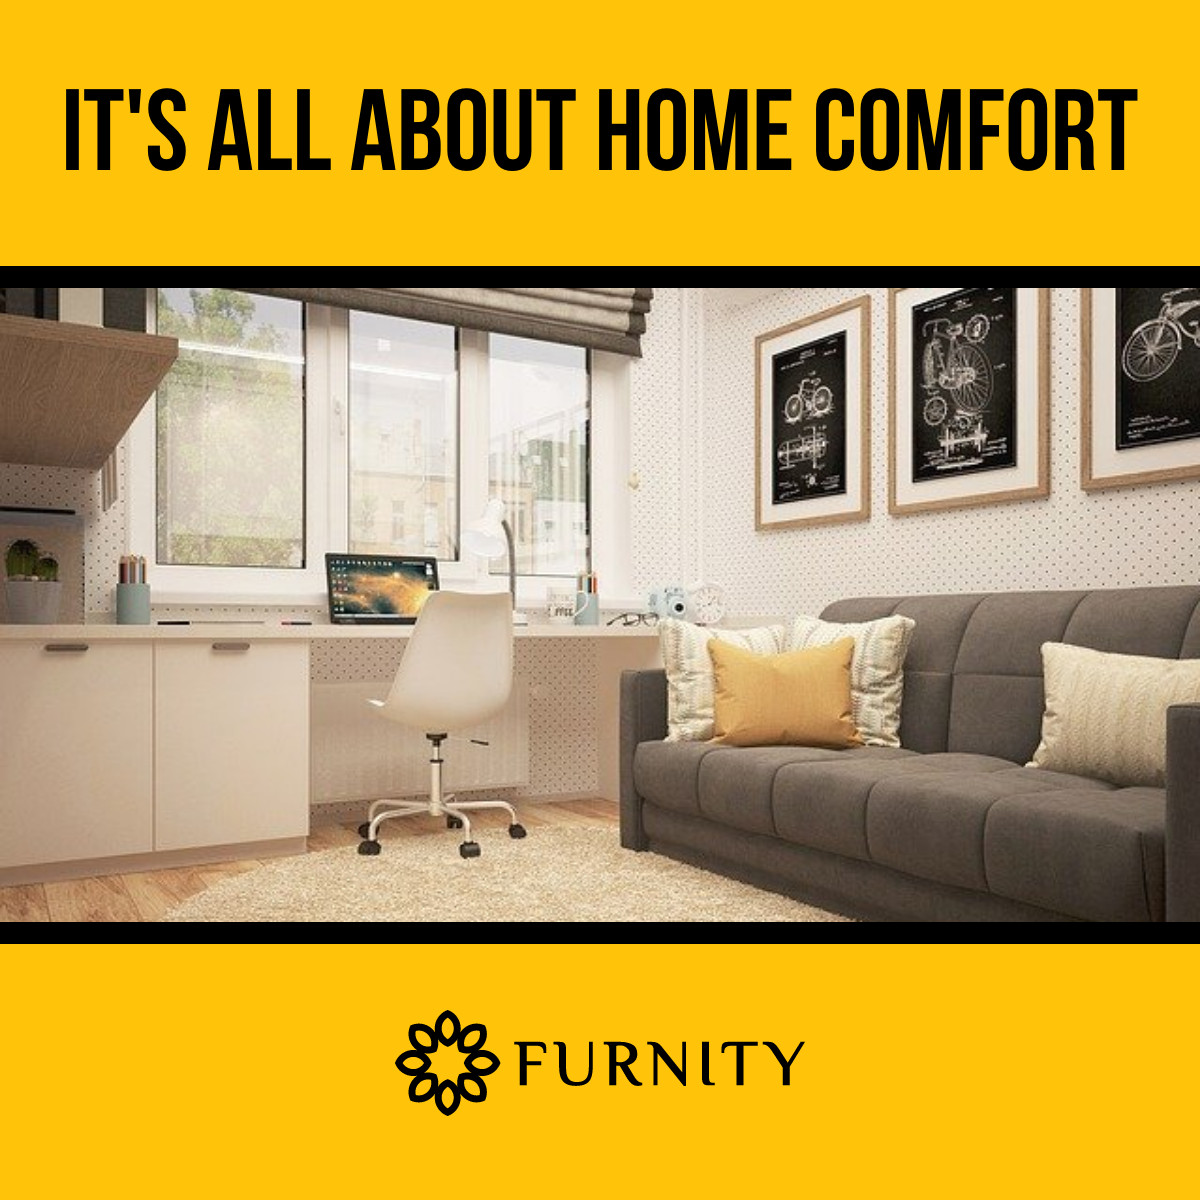 All About Home Comfort Furniture